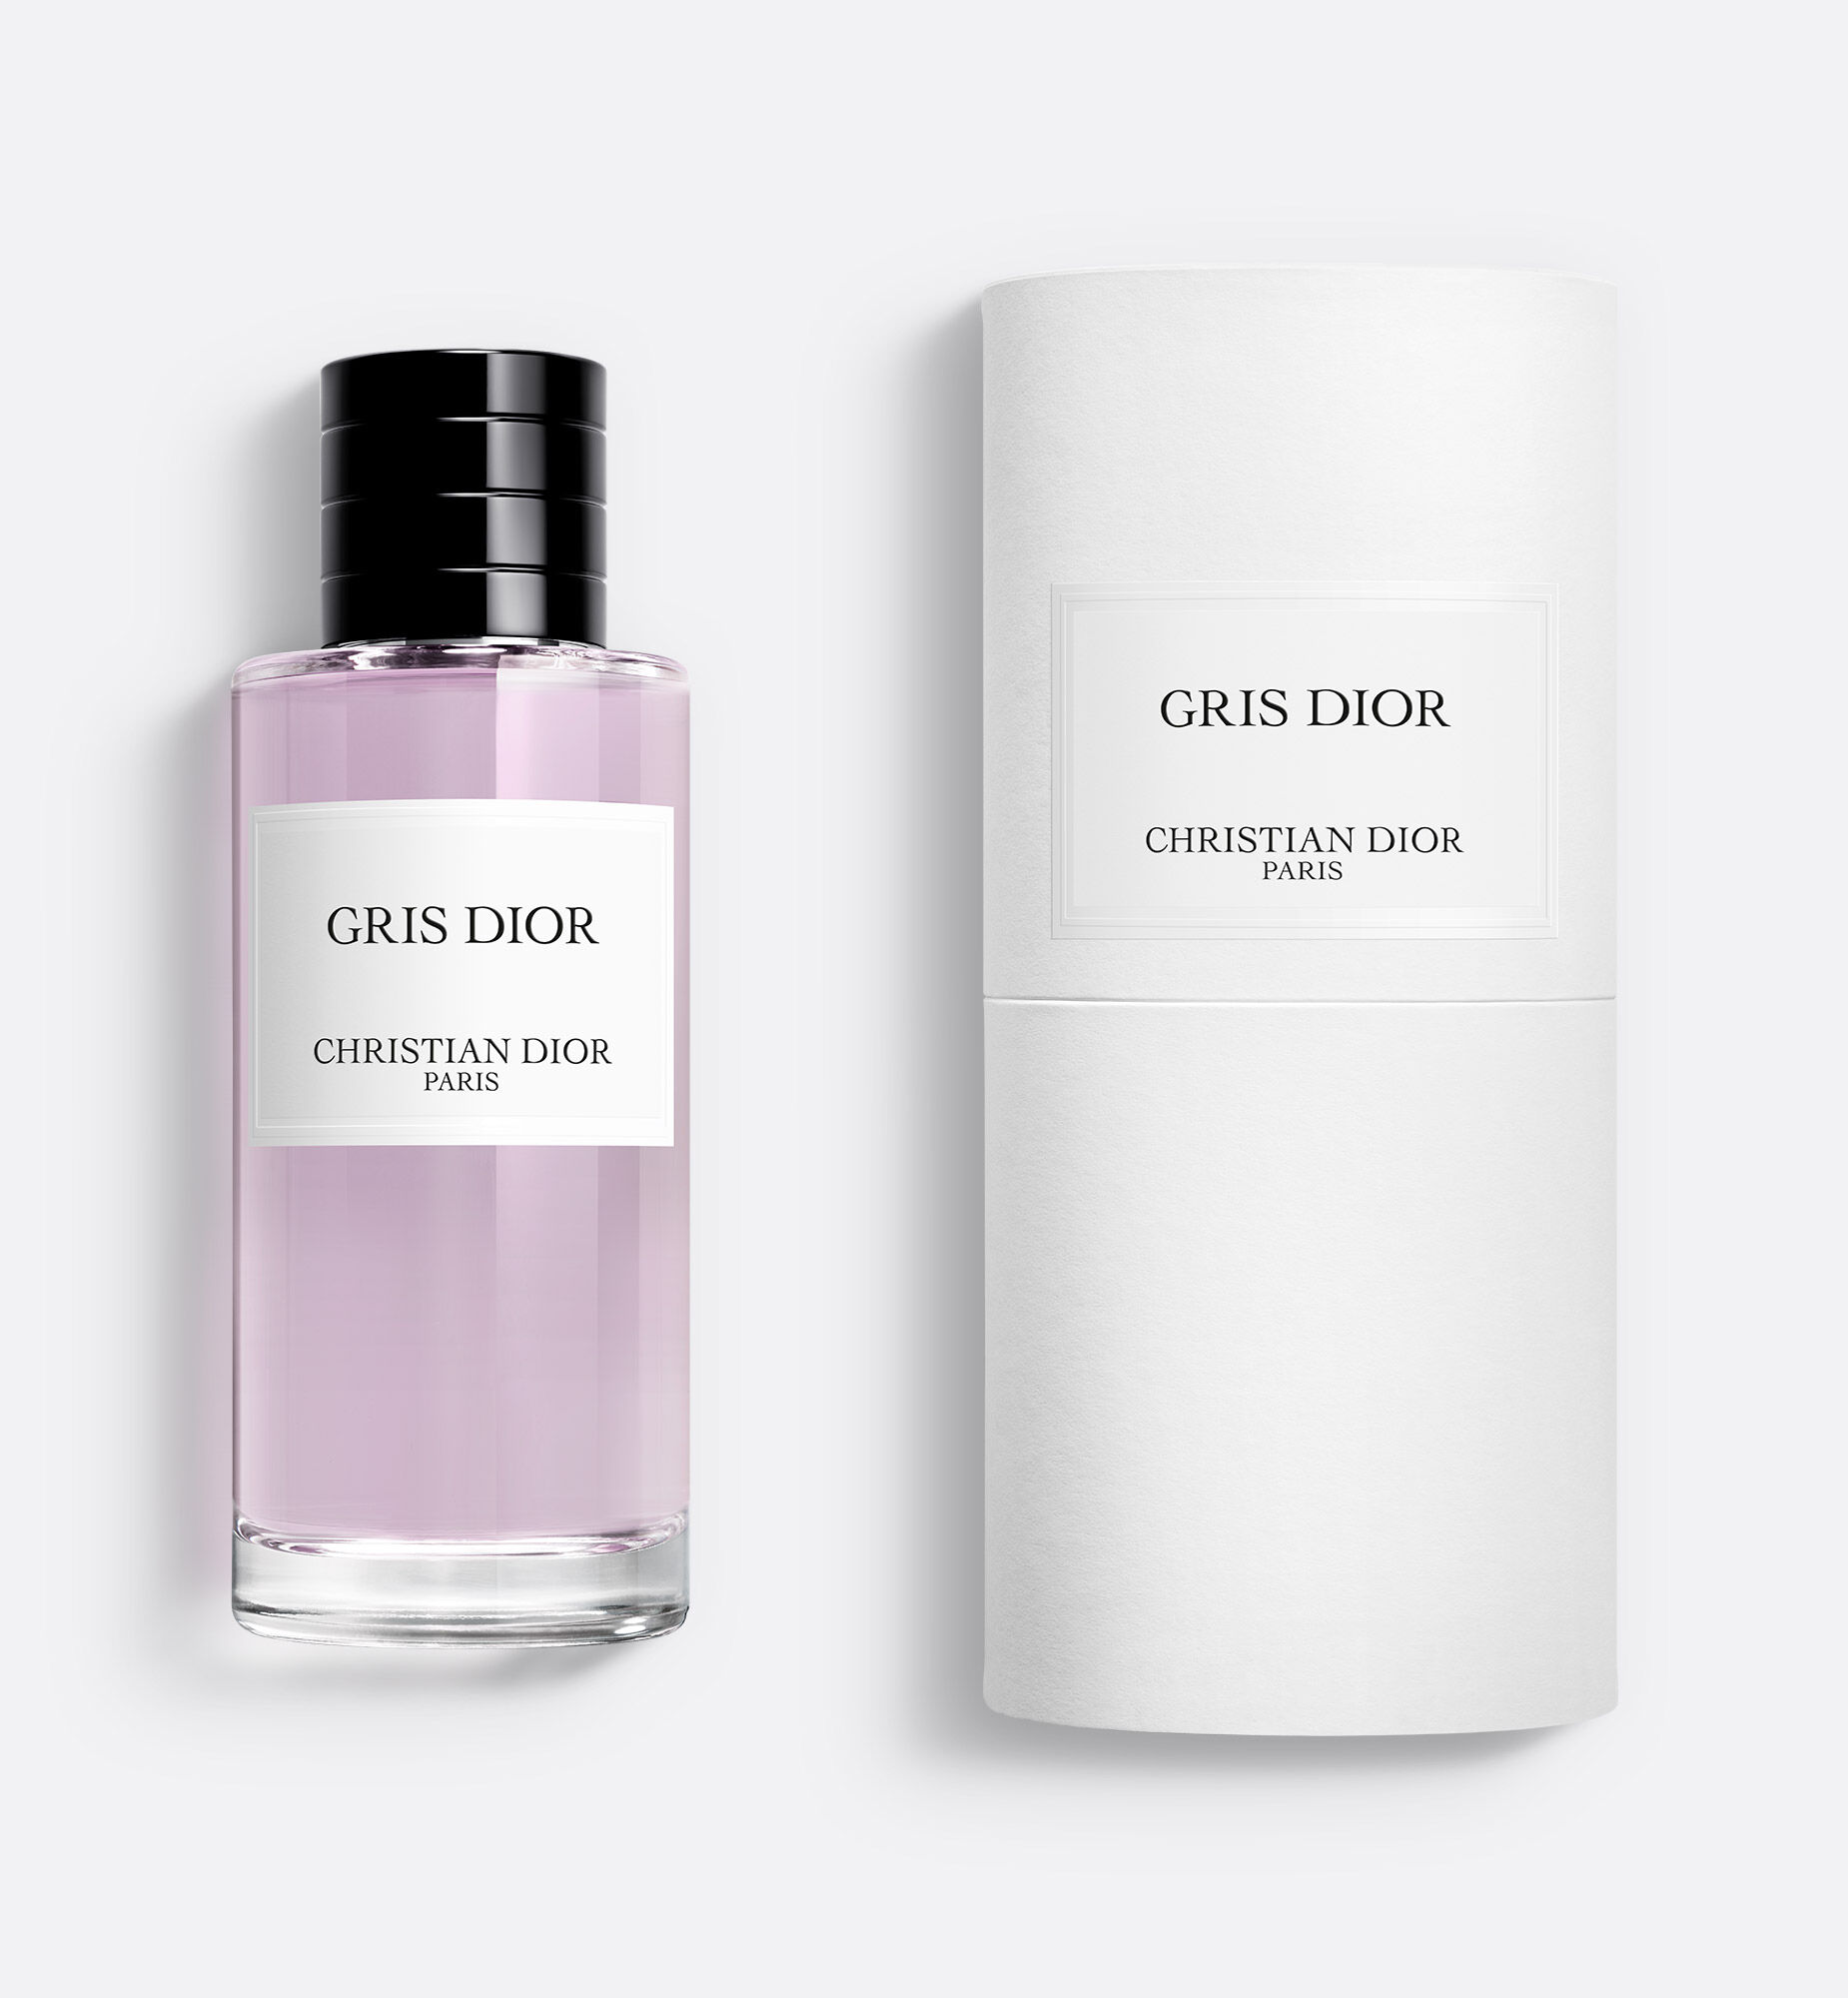 Miss Dior RollerPearl the new fragrance gesture by Dior  Dior UK